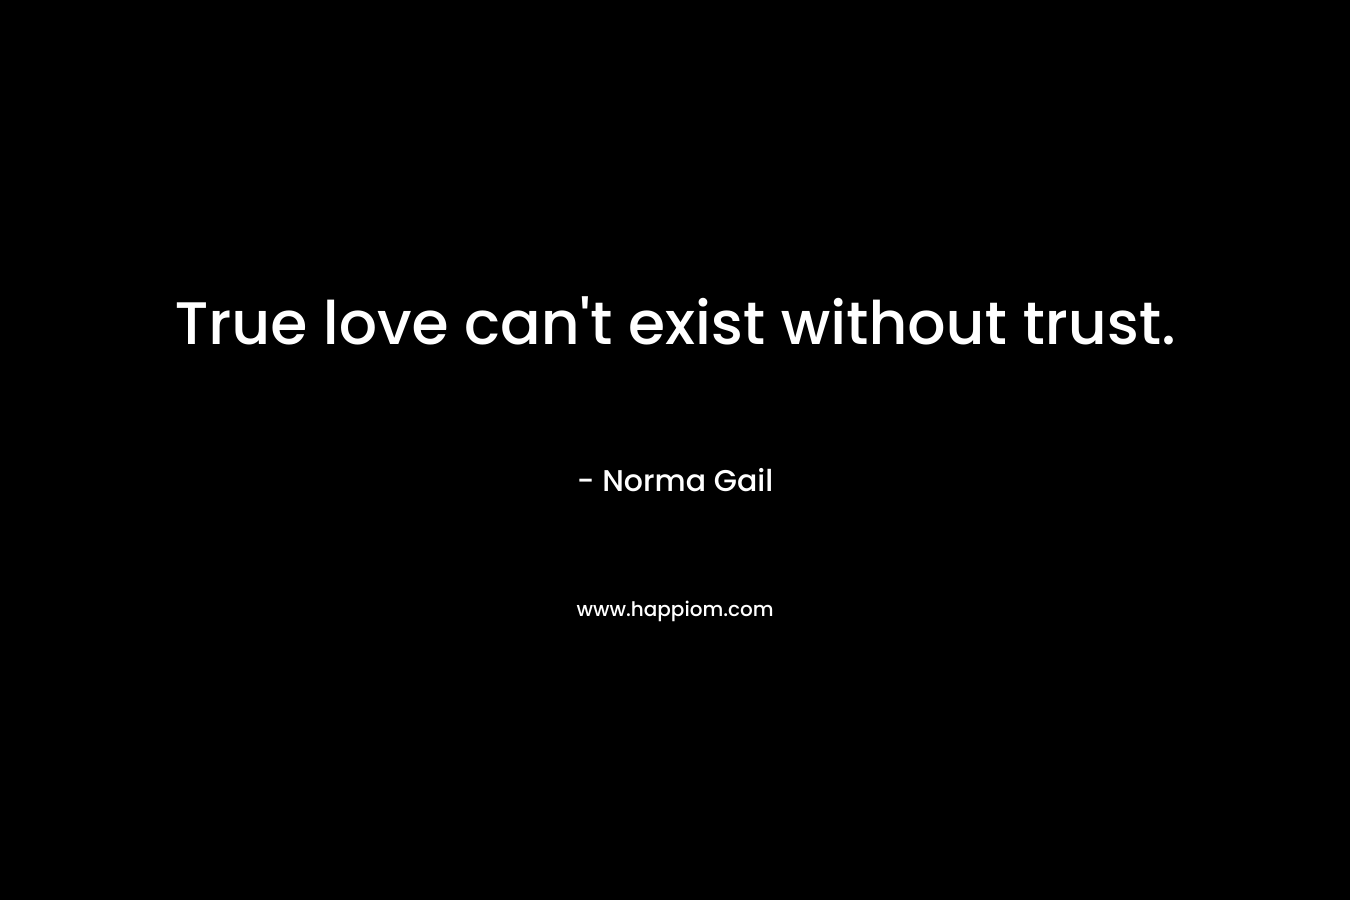 True love can't exist without trust.